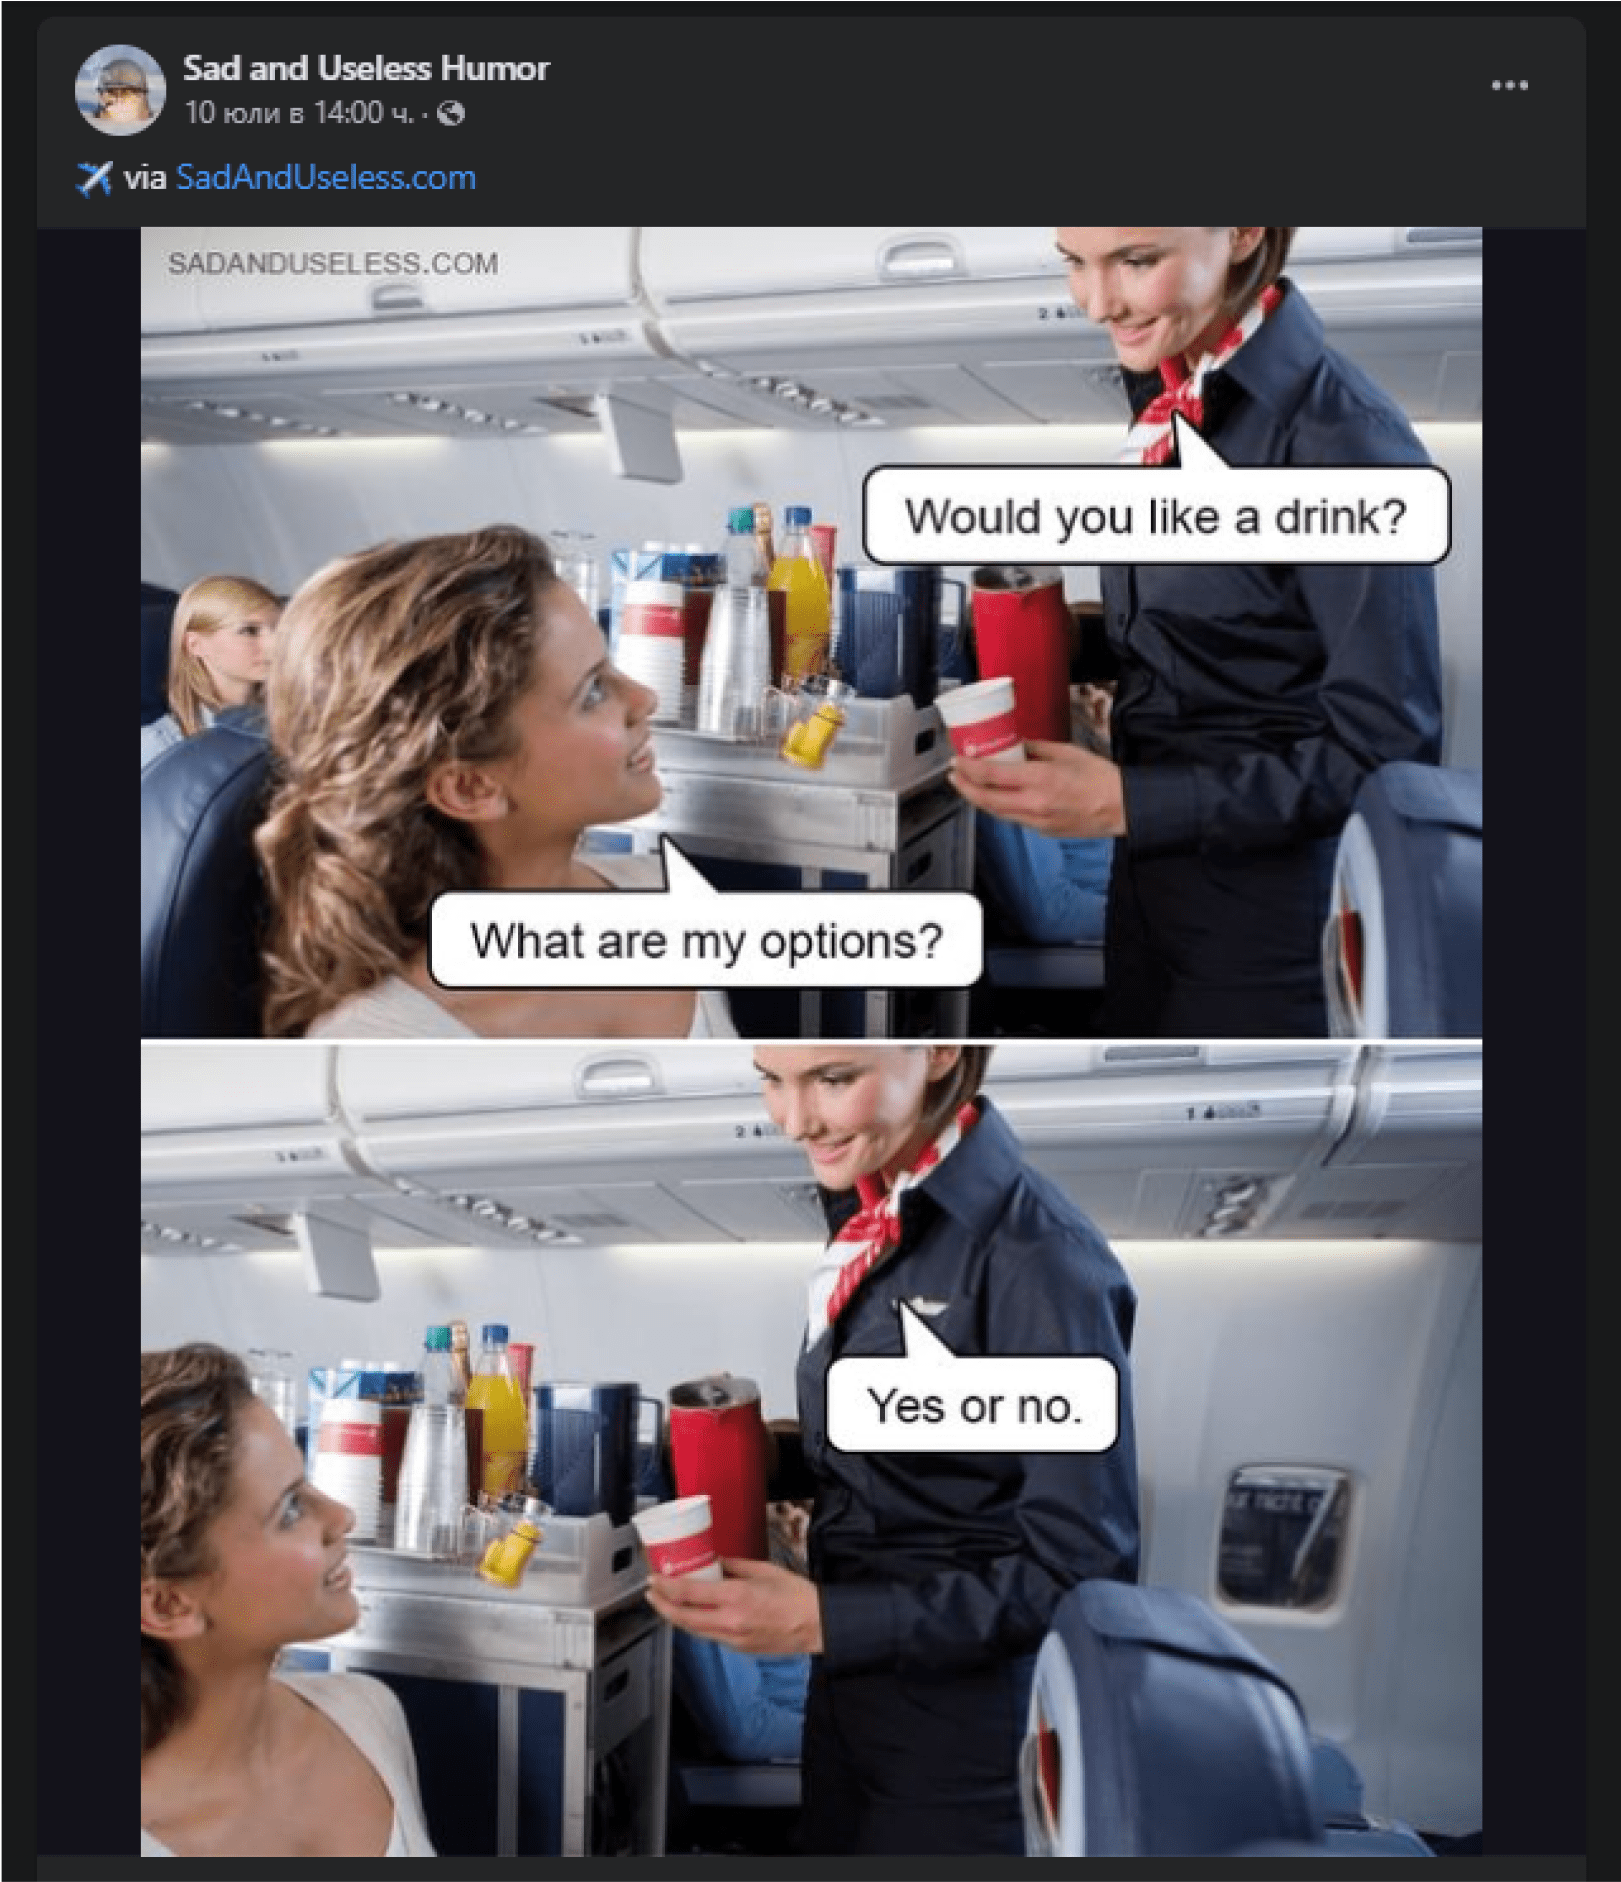 Humorous meme from Sad and Useless Humor showing a flight attendant with a caption bubble 'Would you like a drink?' and a passenger responding with 'What are my options?' followed by 'Yes or no.